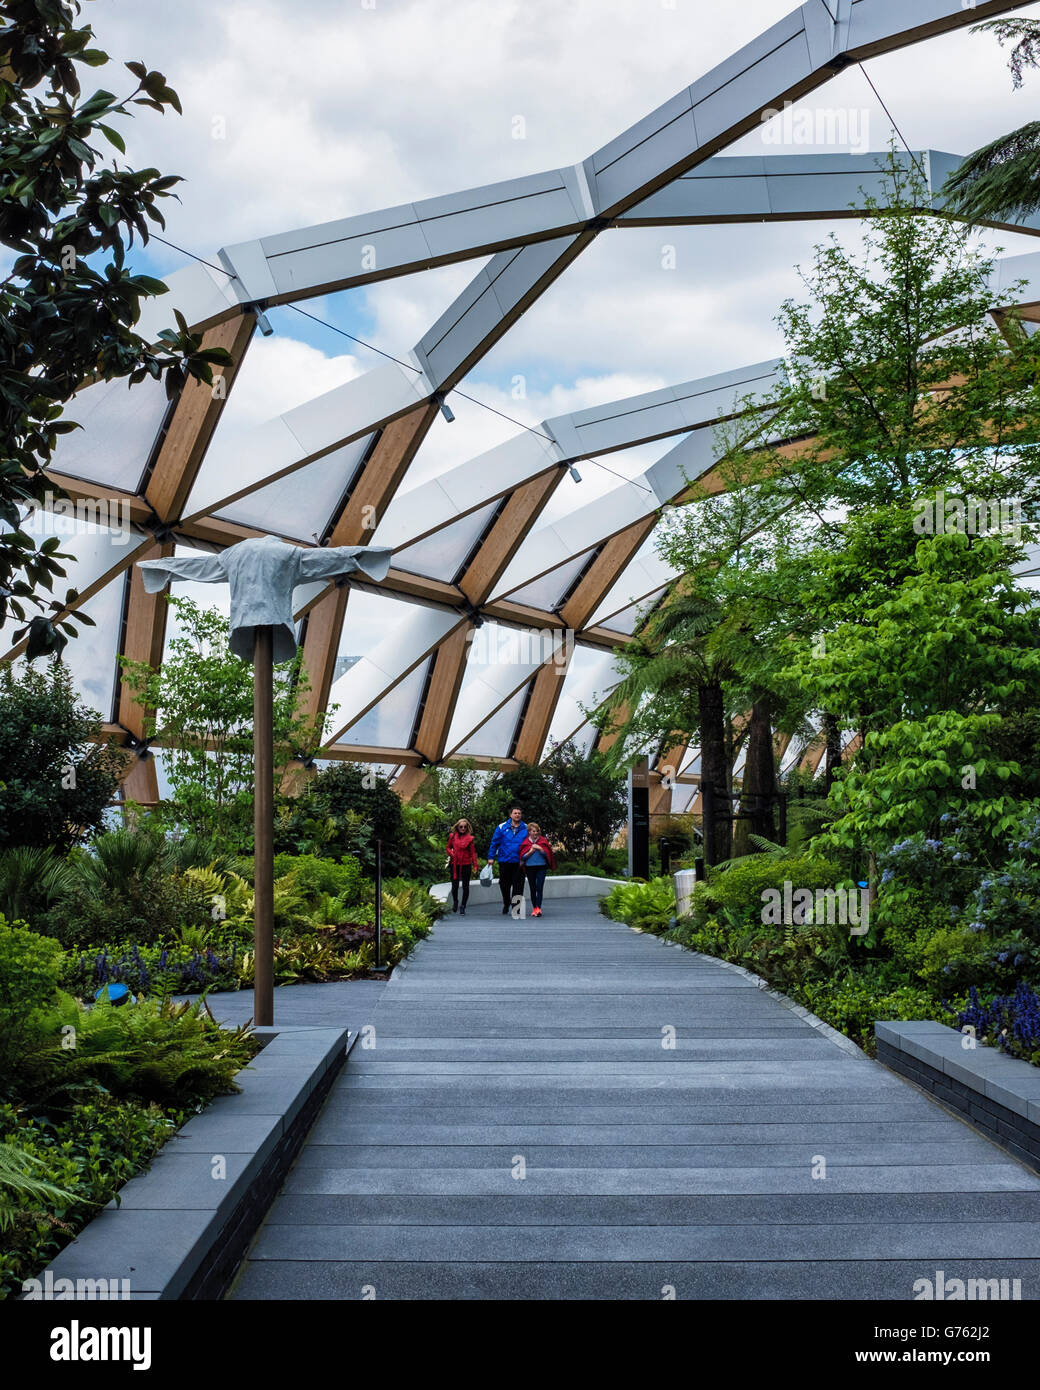 Crossrail Place roof garden on top of New Crossrail Railway Station Building, London, Canary Wharf Stock Photo